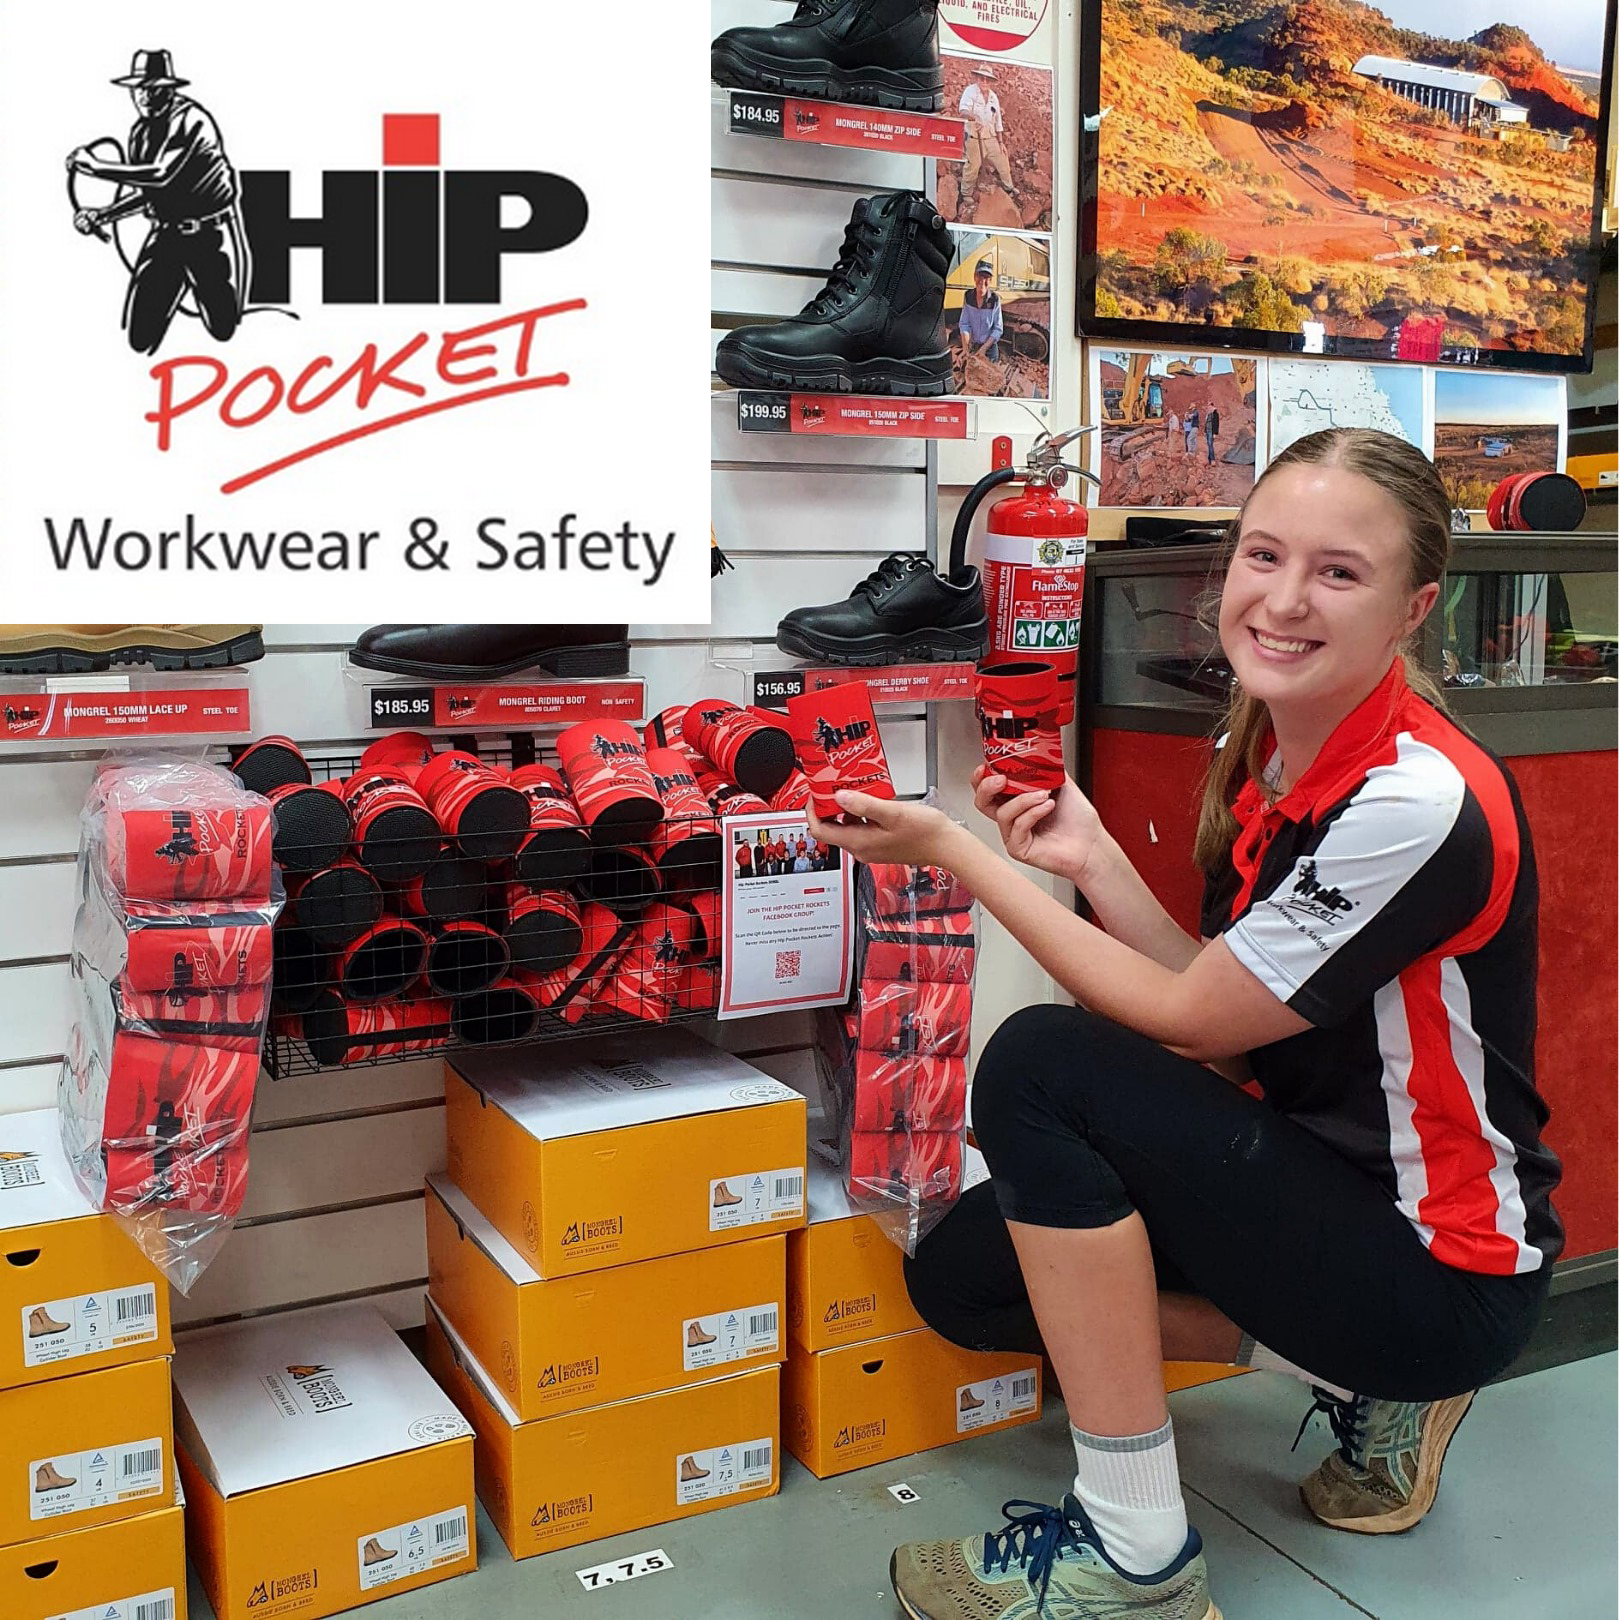 safety boots 2 - hip pocket workwear & safety toowoomba